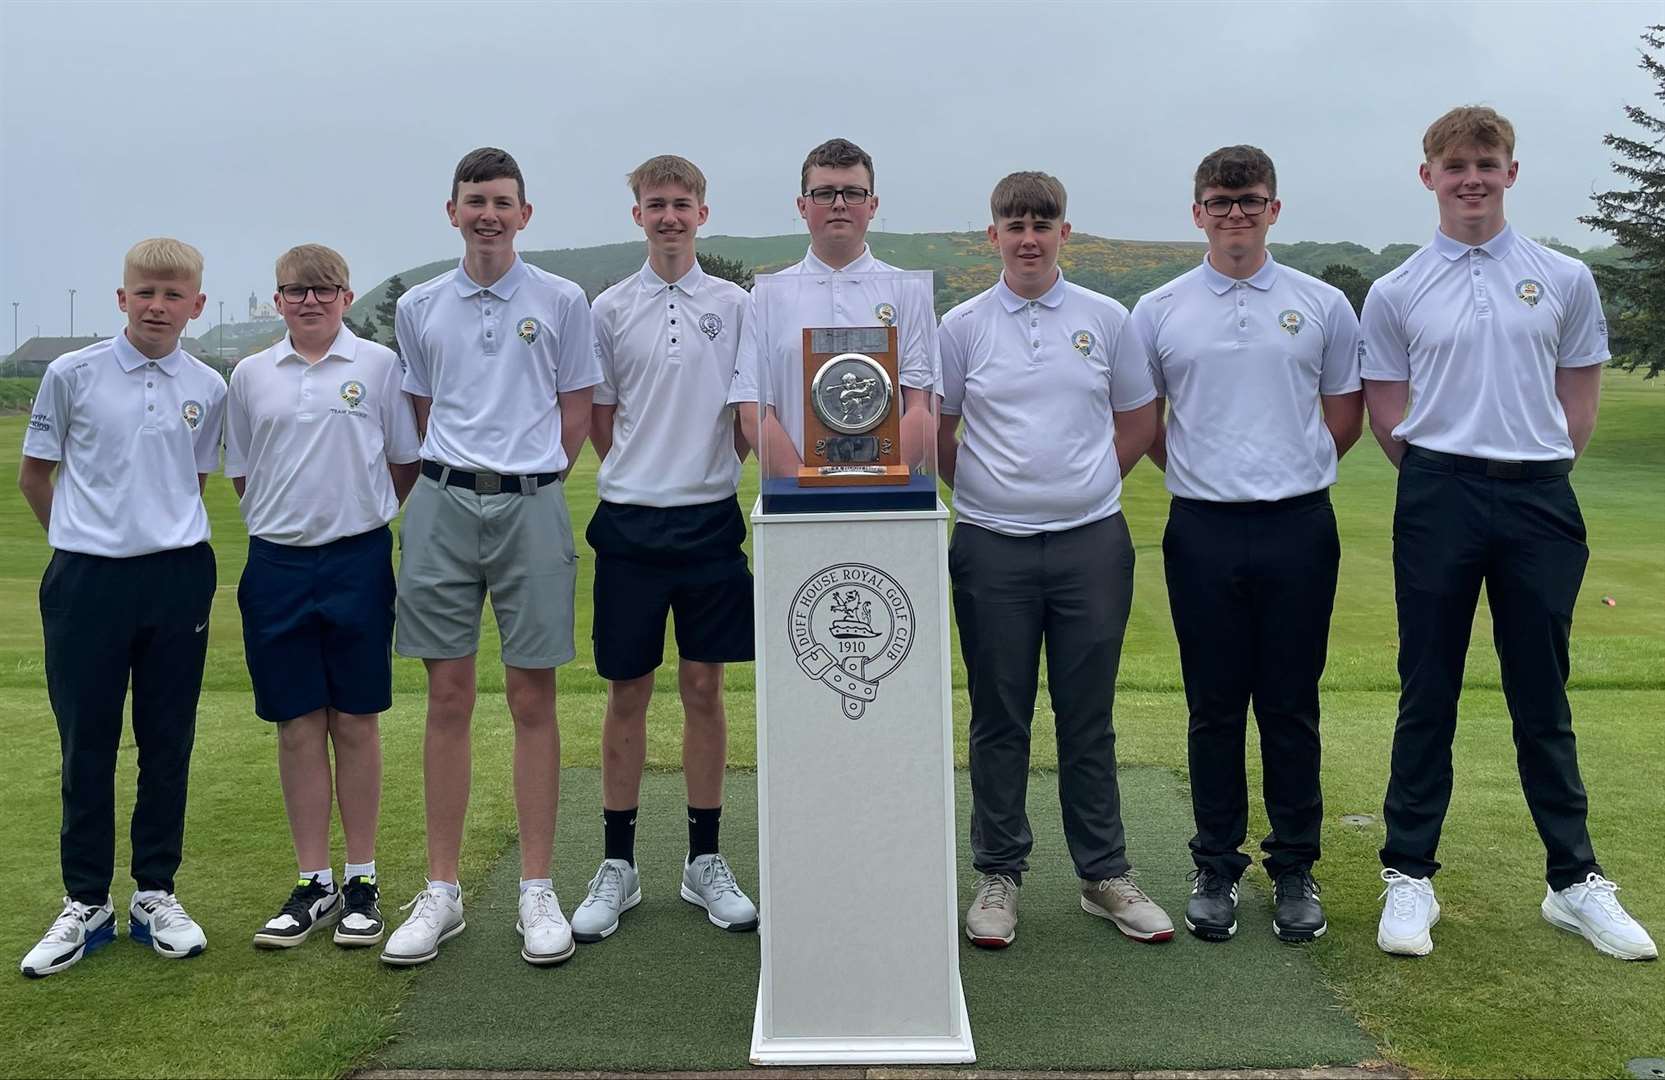 The future of Duff House Royal Golf Club - the current Felicity Cup champions.